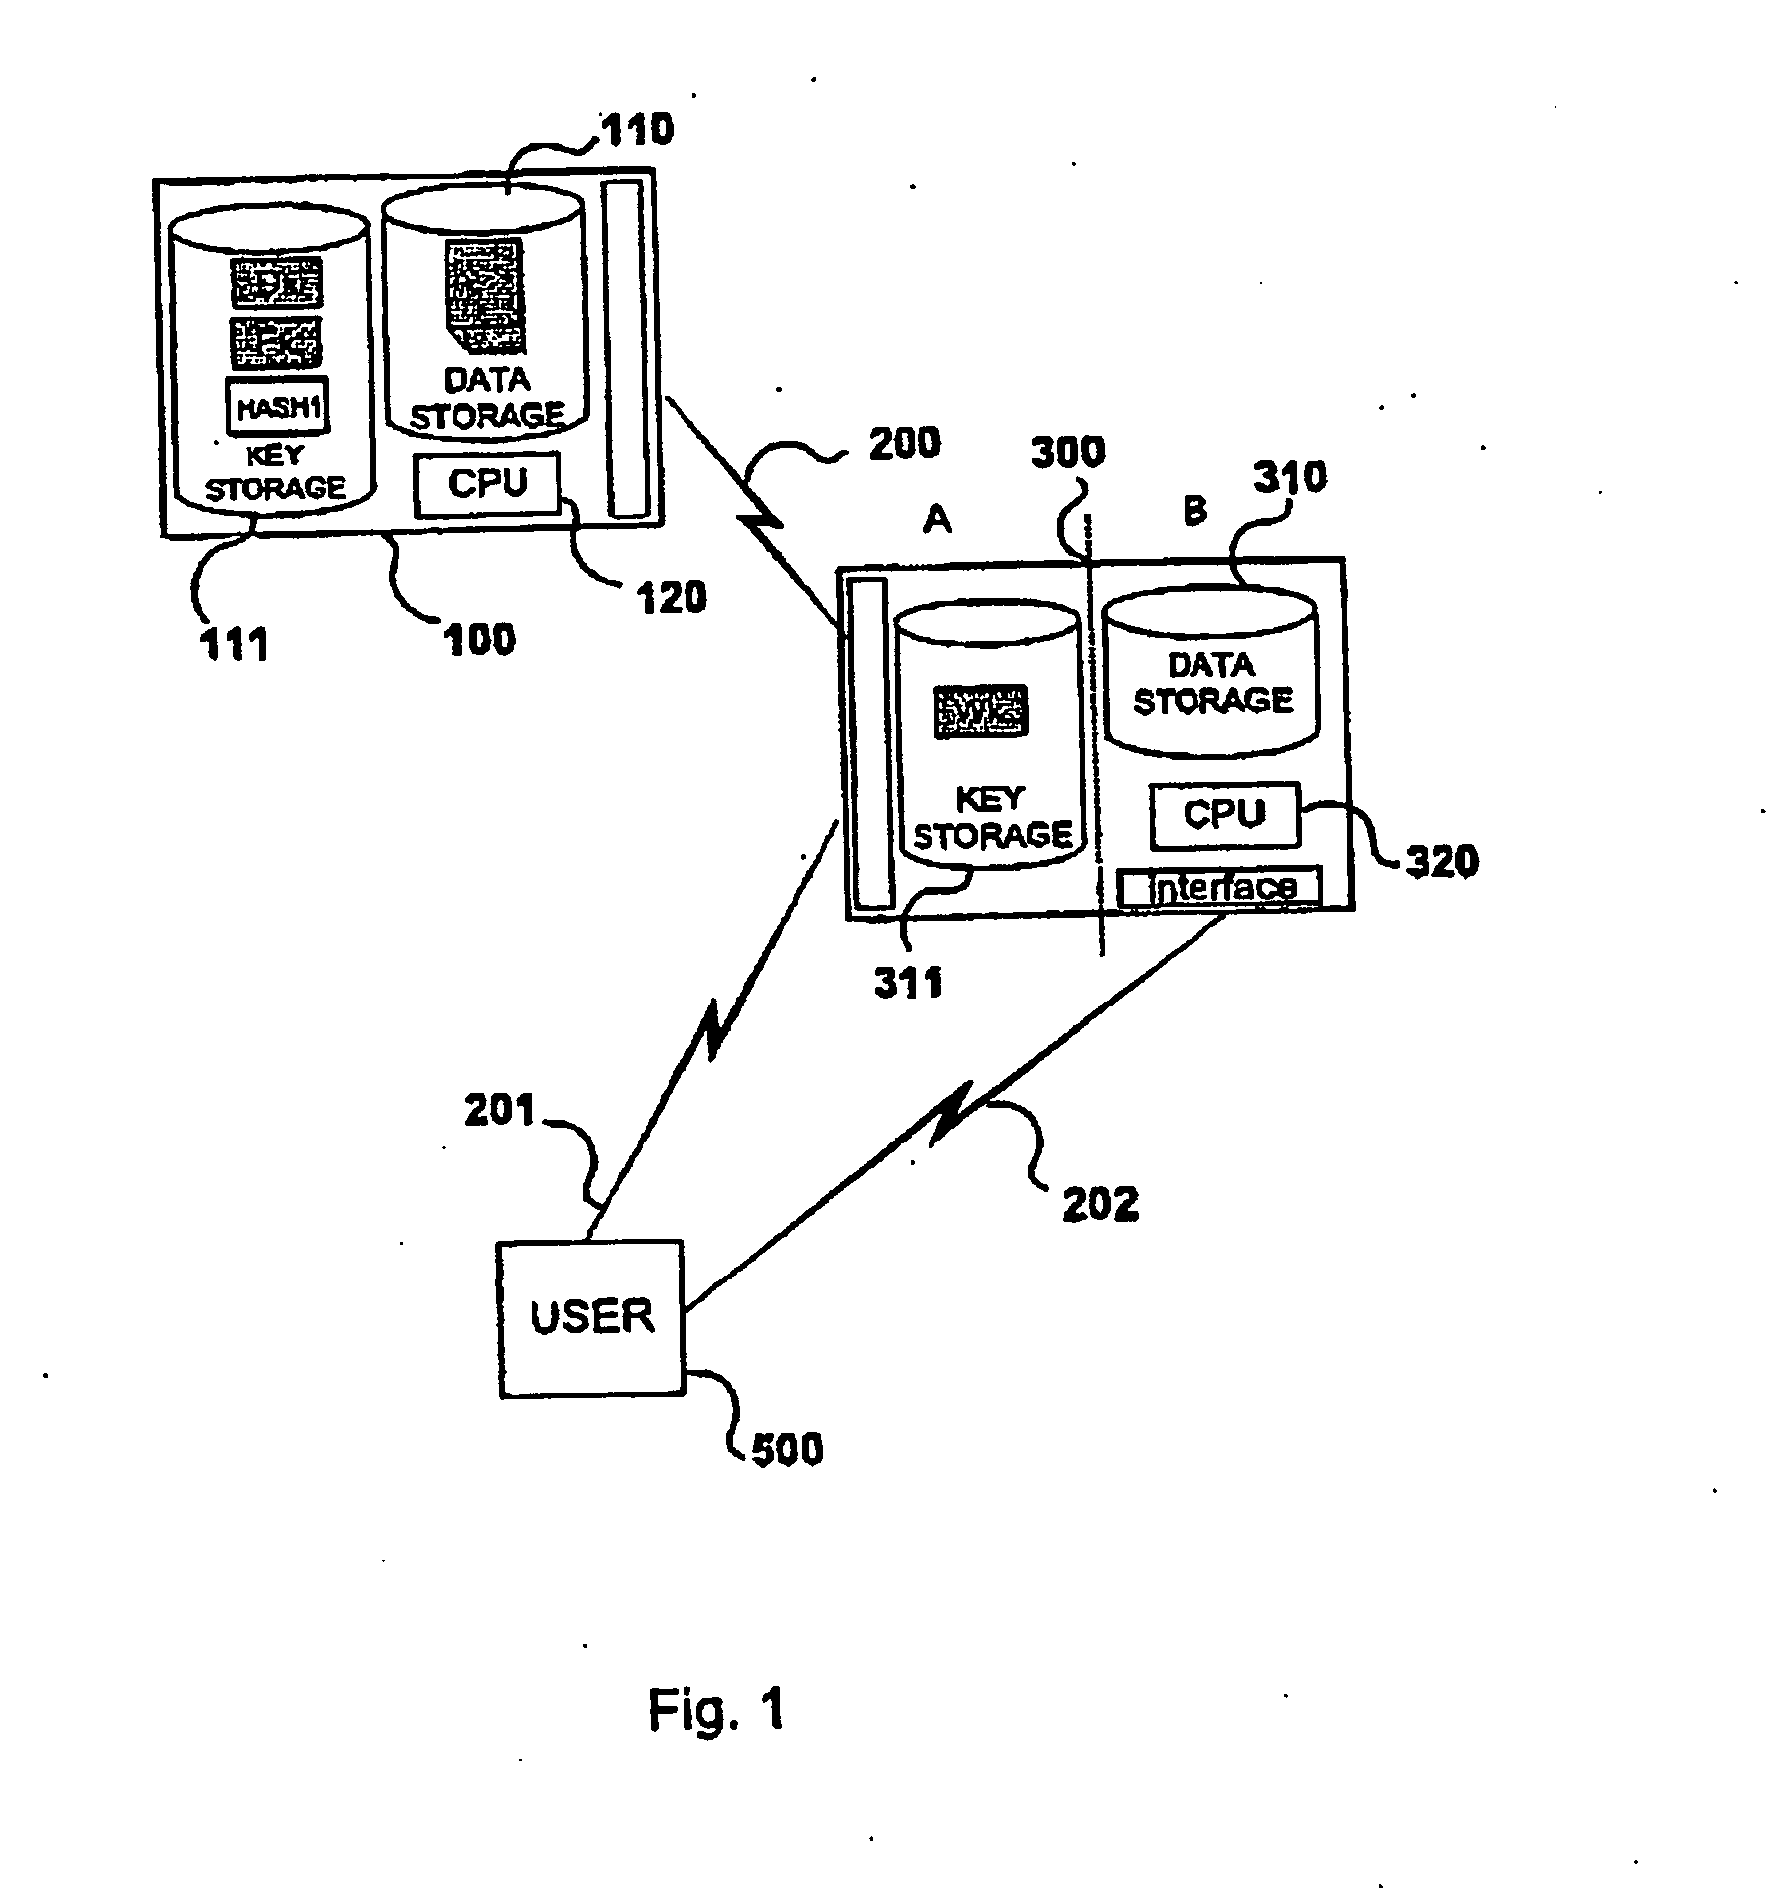 Method and system for authentication, data communication, storage and retrieval in a distributed key cryptography system